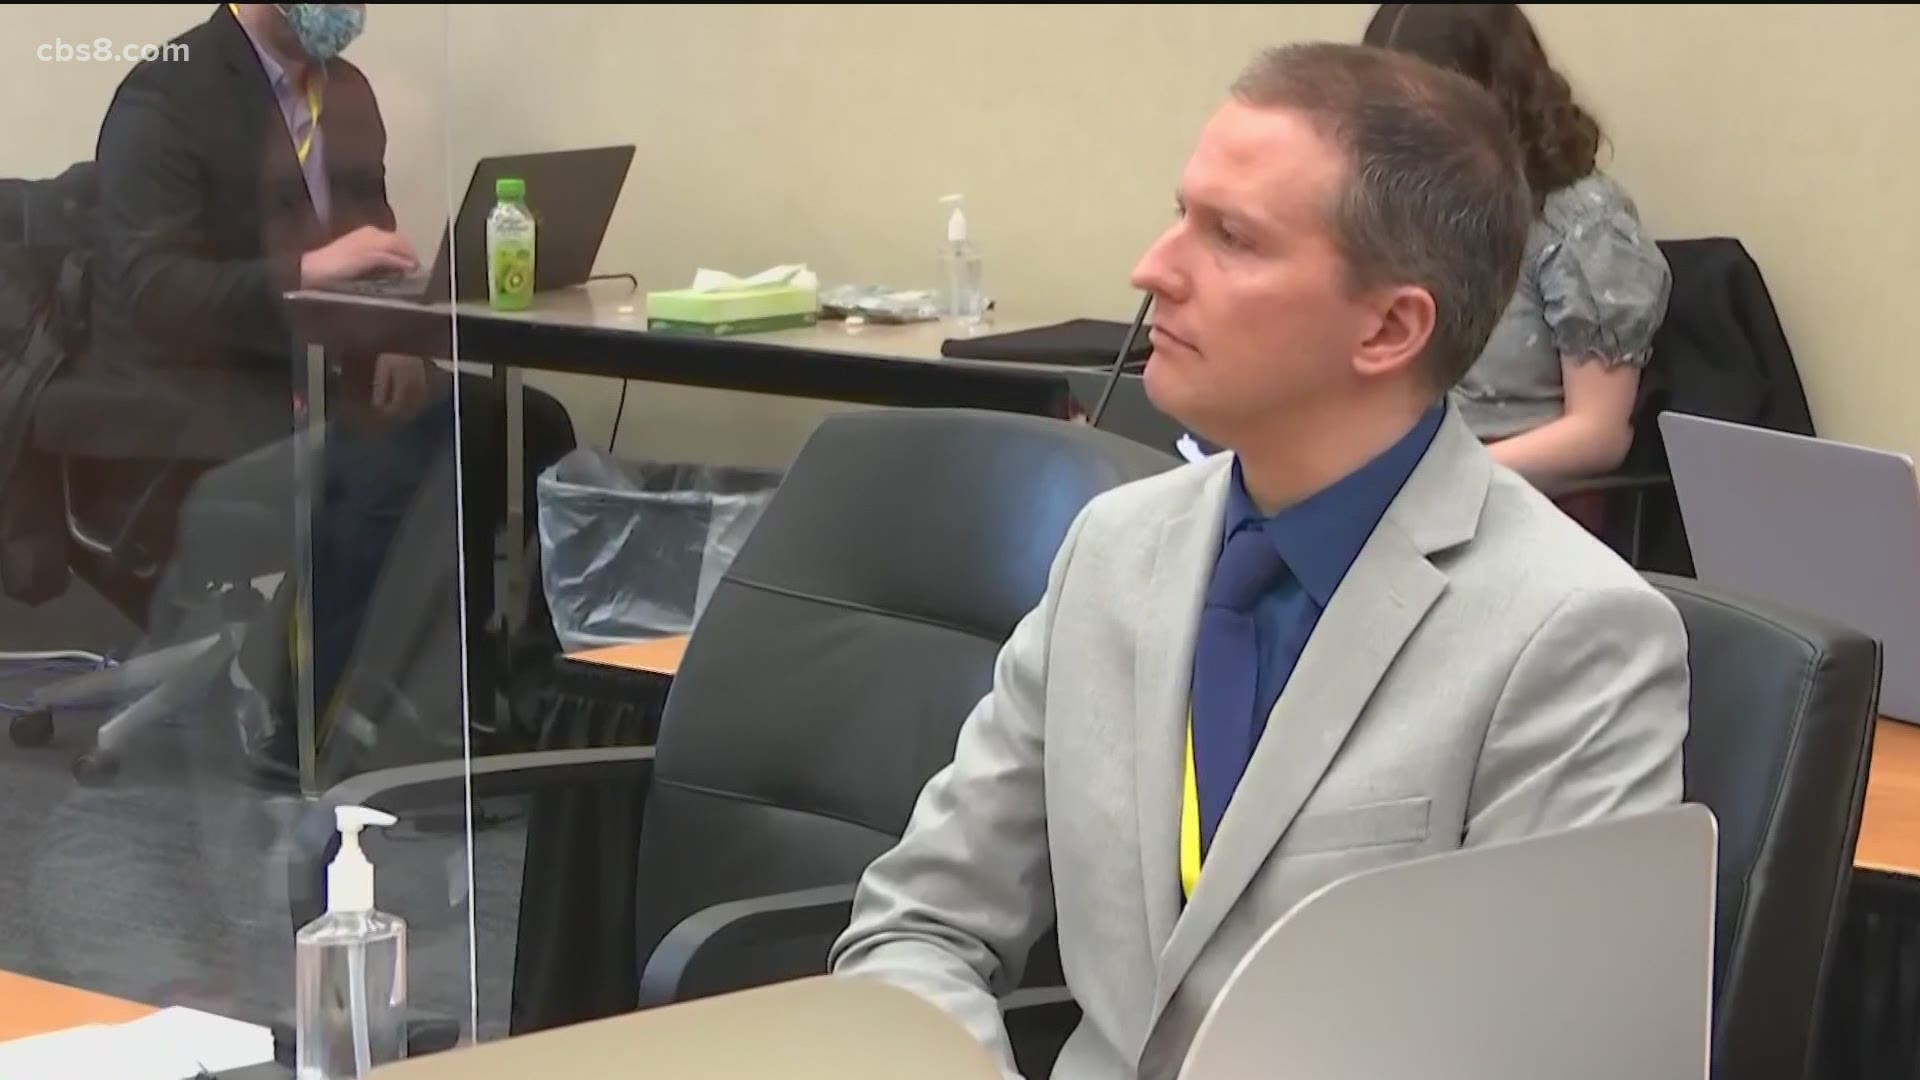 The case is now in the hands of the jury, after closing arguments wrapped up Monday.